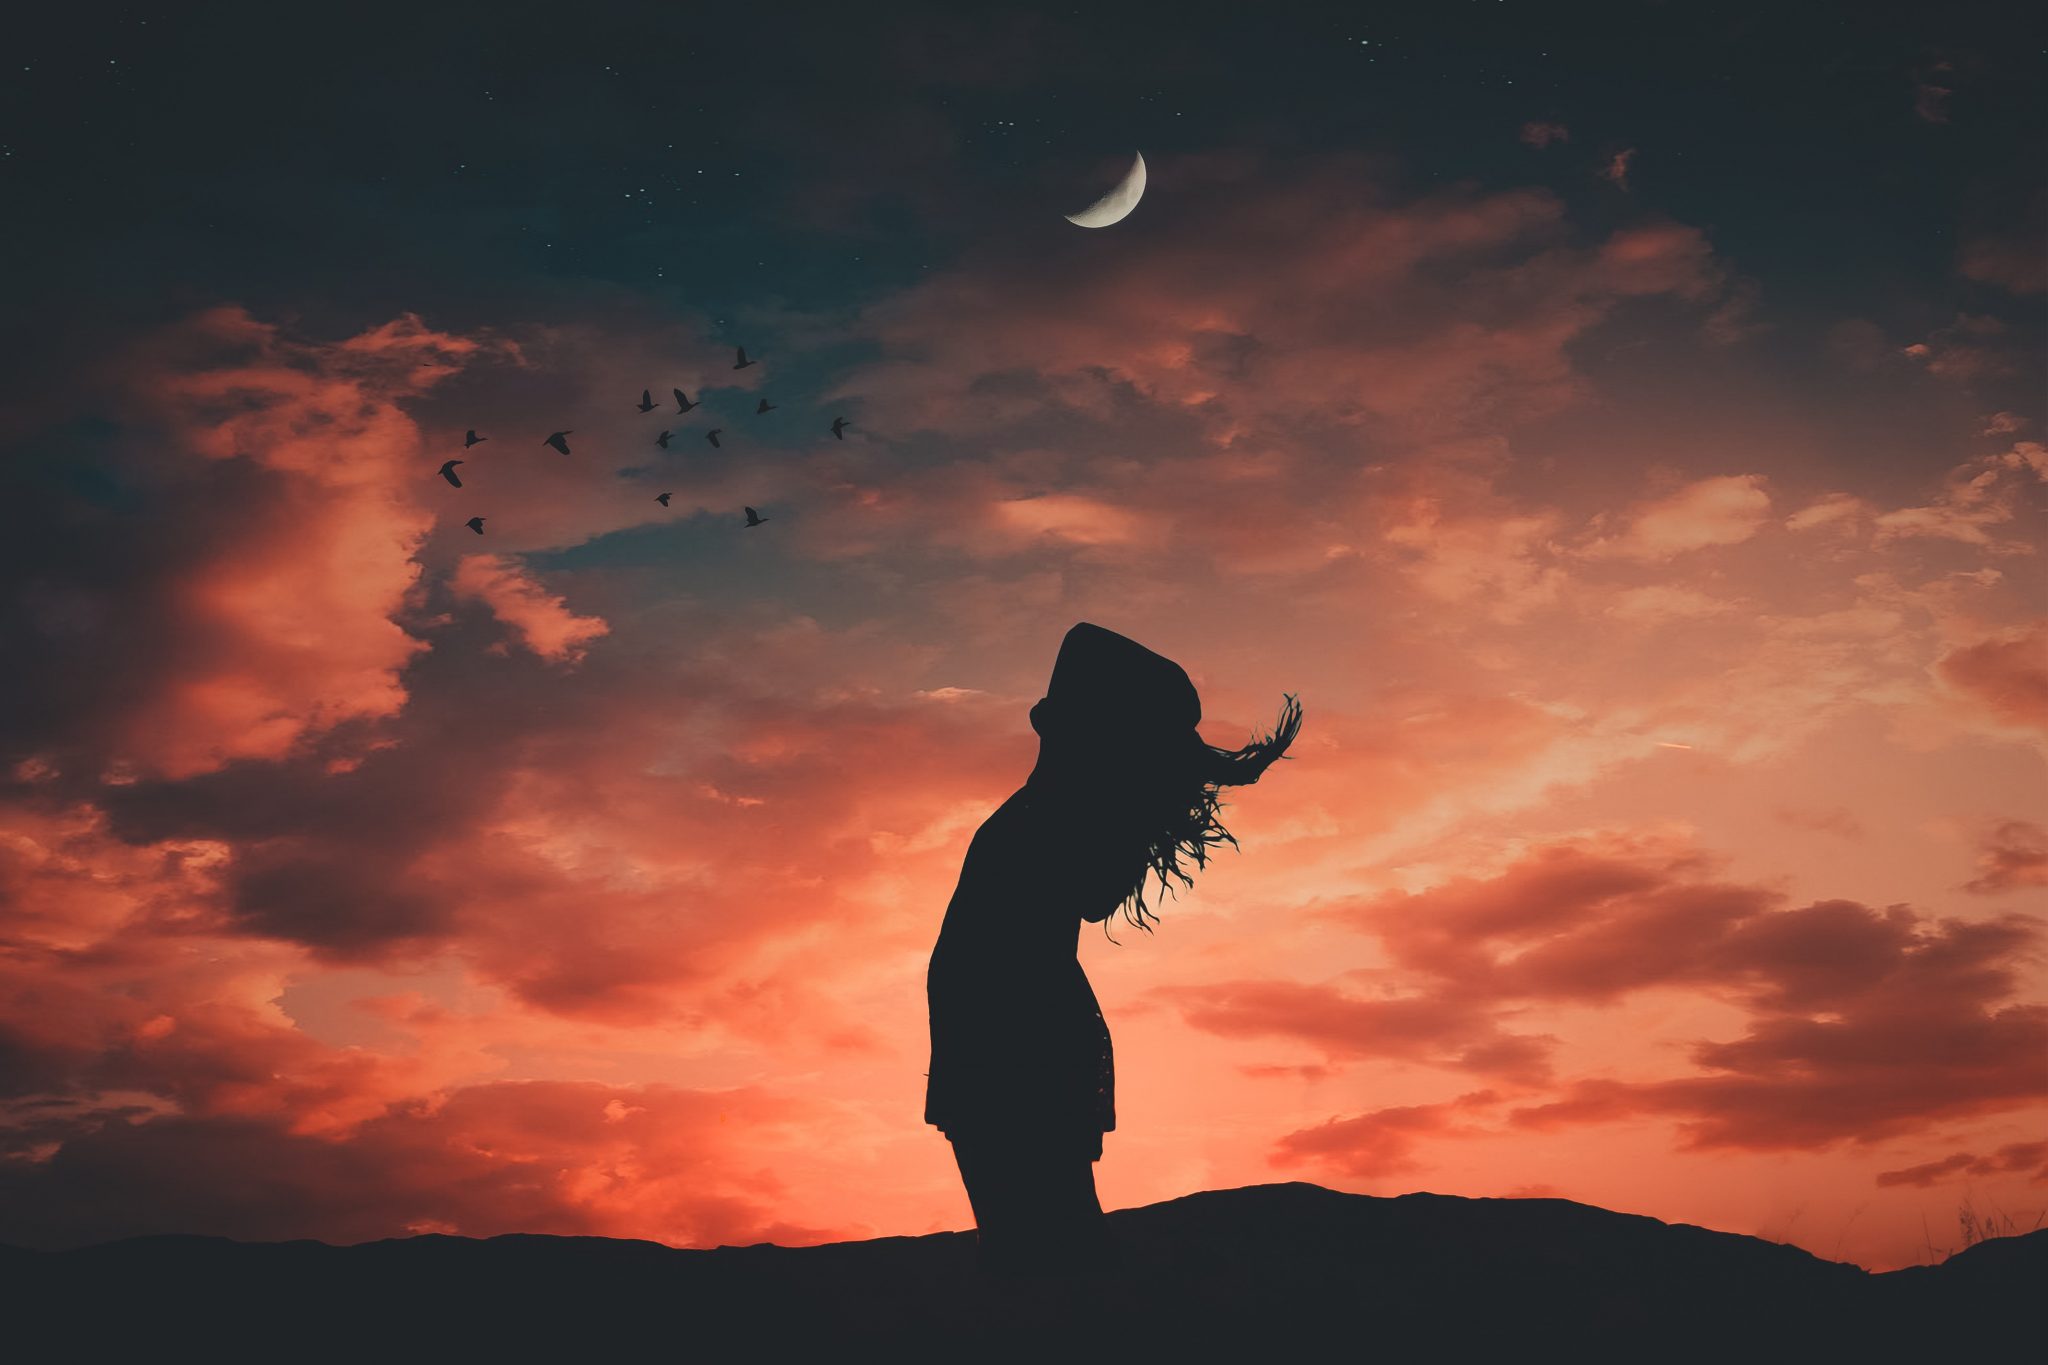 Silhouette of a woman at dawn with crescent moon